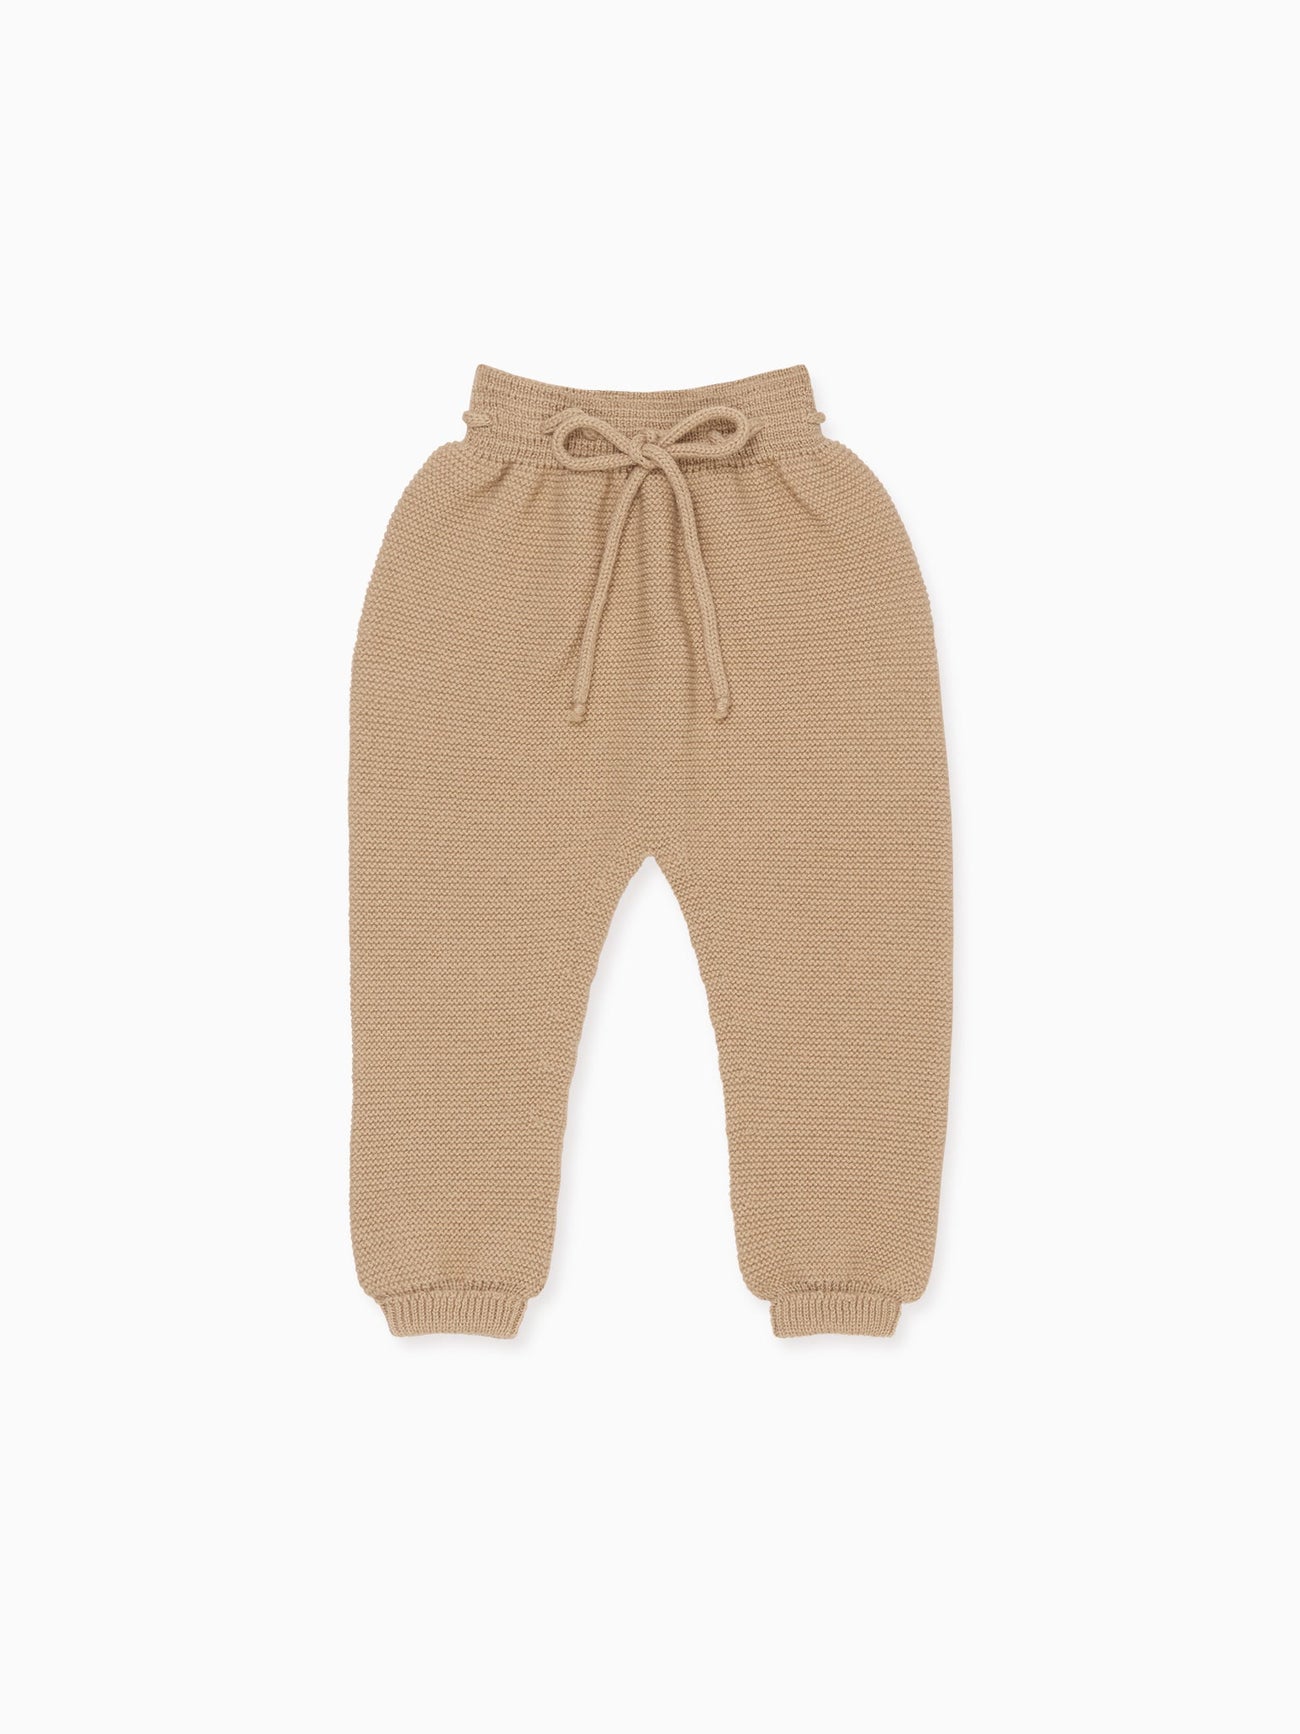 Camel Augusto Merino Baby Knitted Trousers